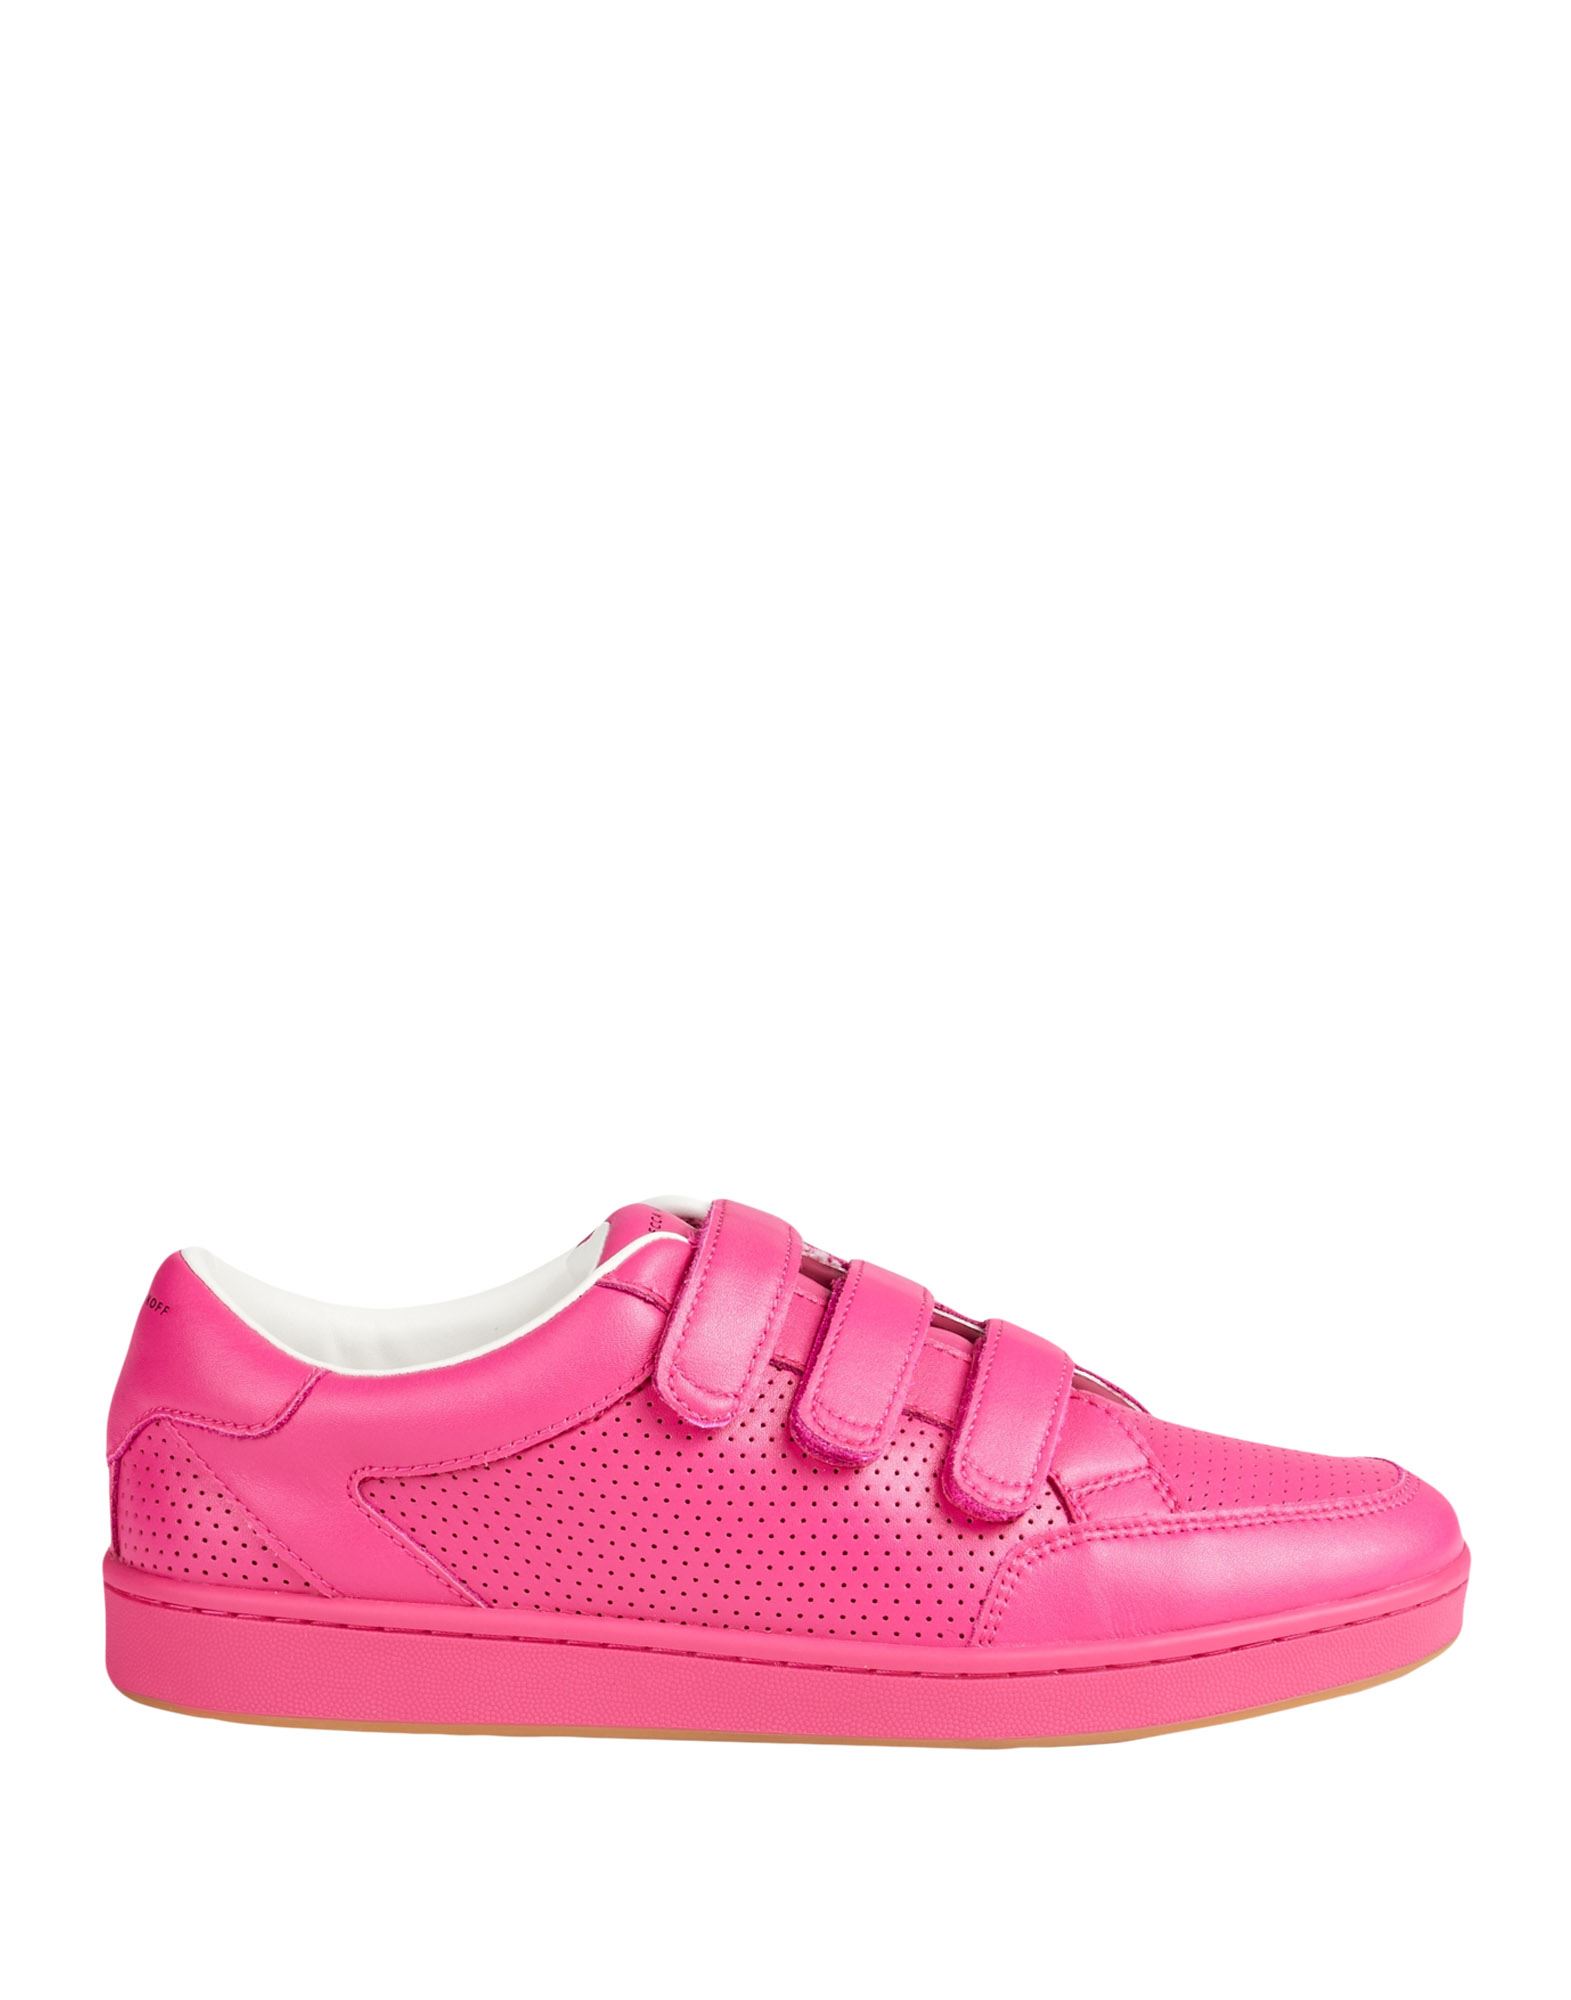 Rebecca Minkoff Women's Perforated Leather Sneakers In Hot Pink